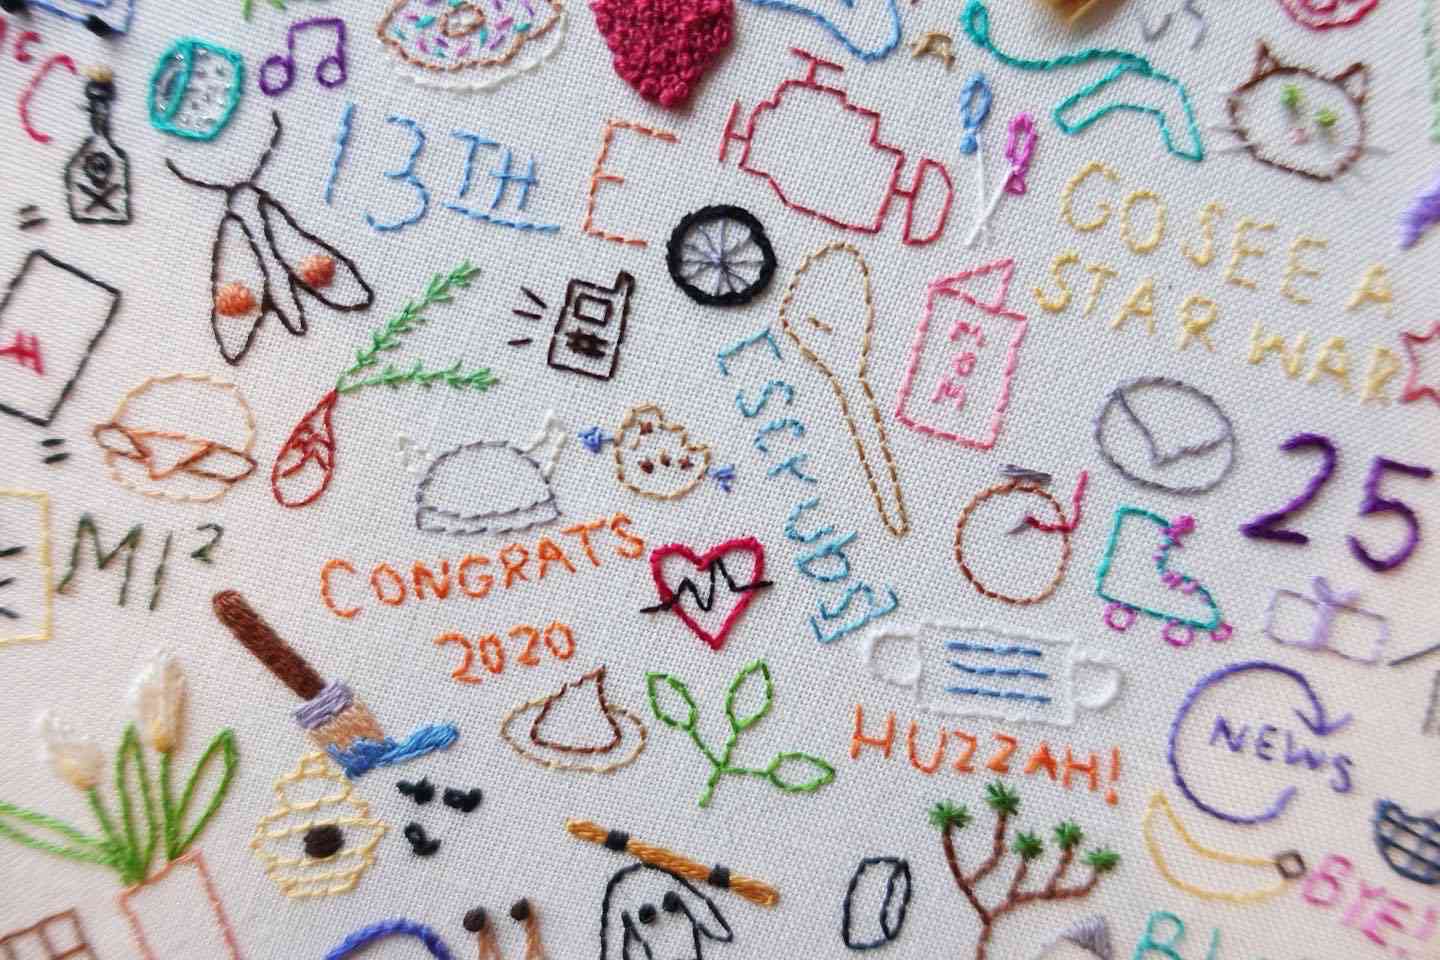 Embroidery journaling close-up